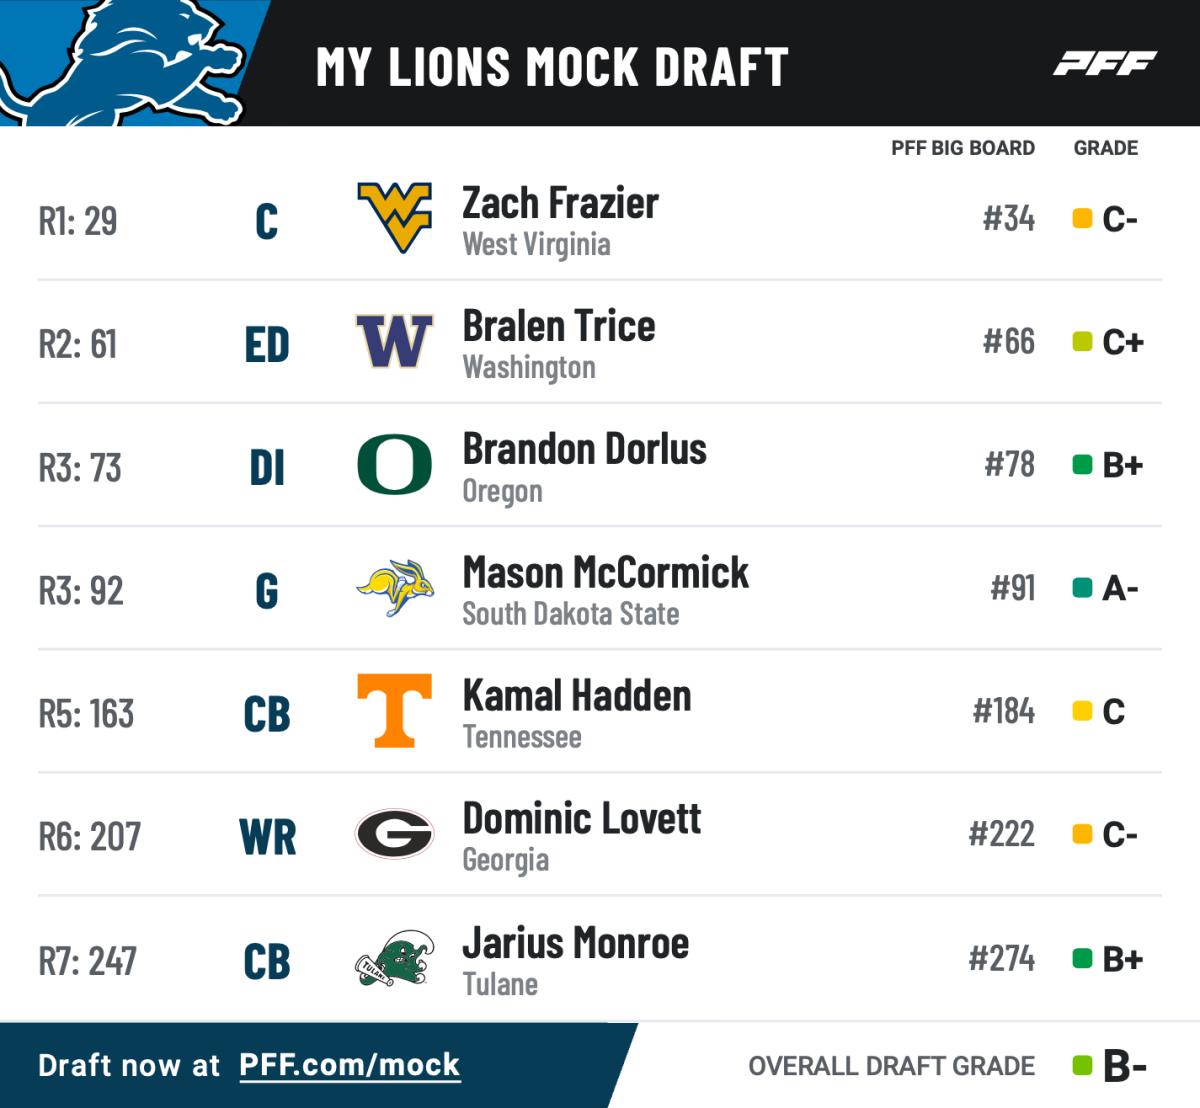 Results from a Pro Football Focus Mock Draft simulation.